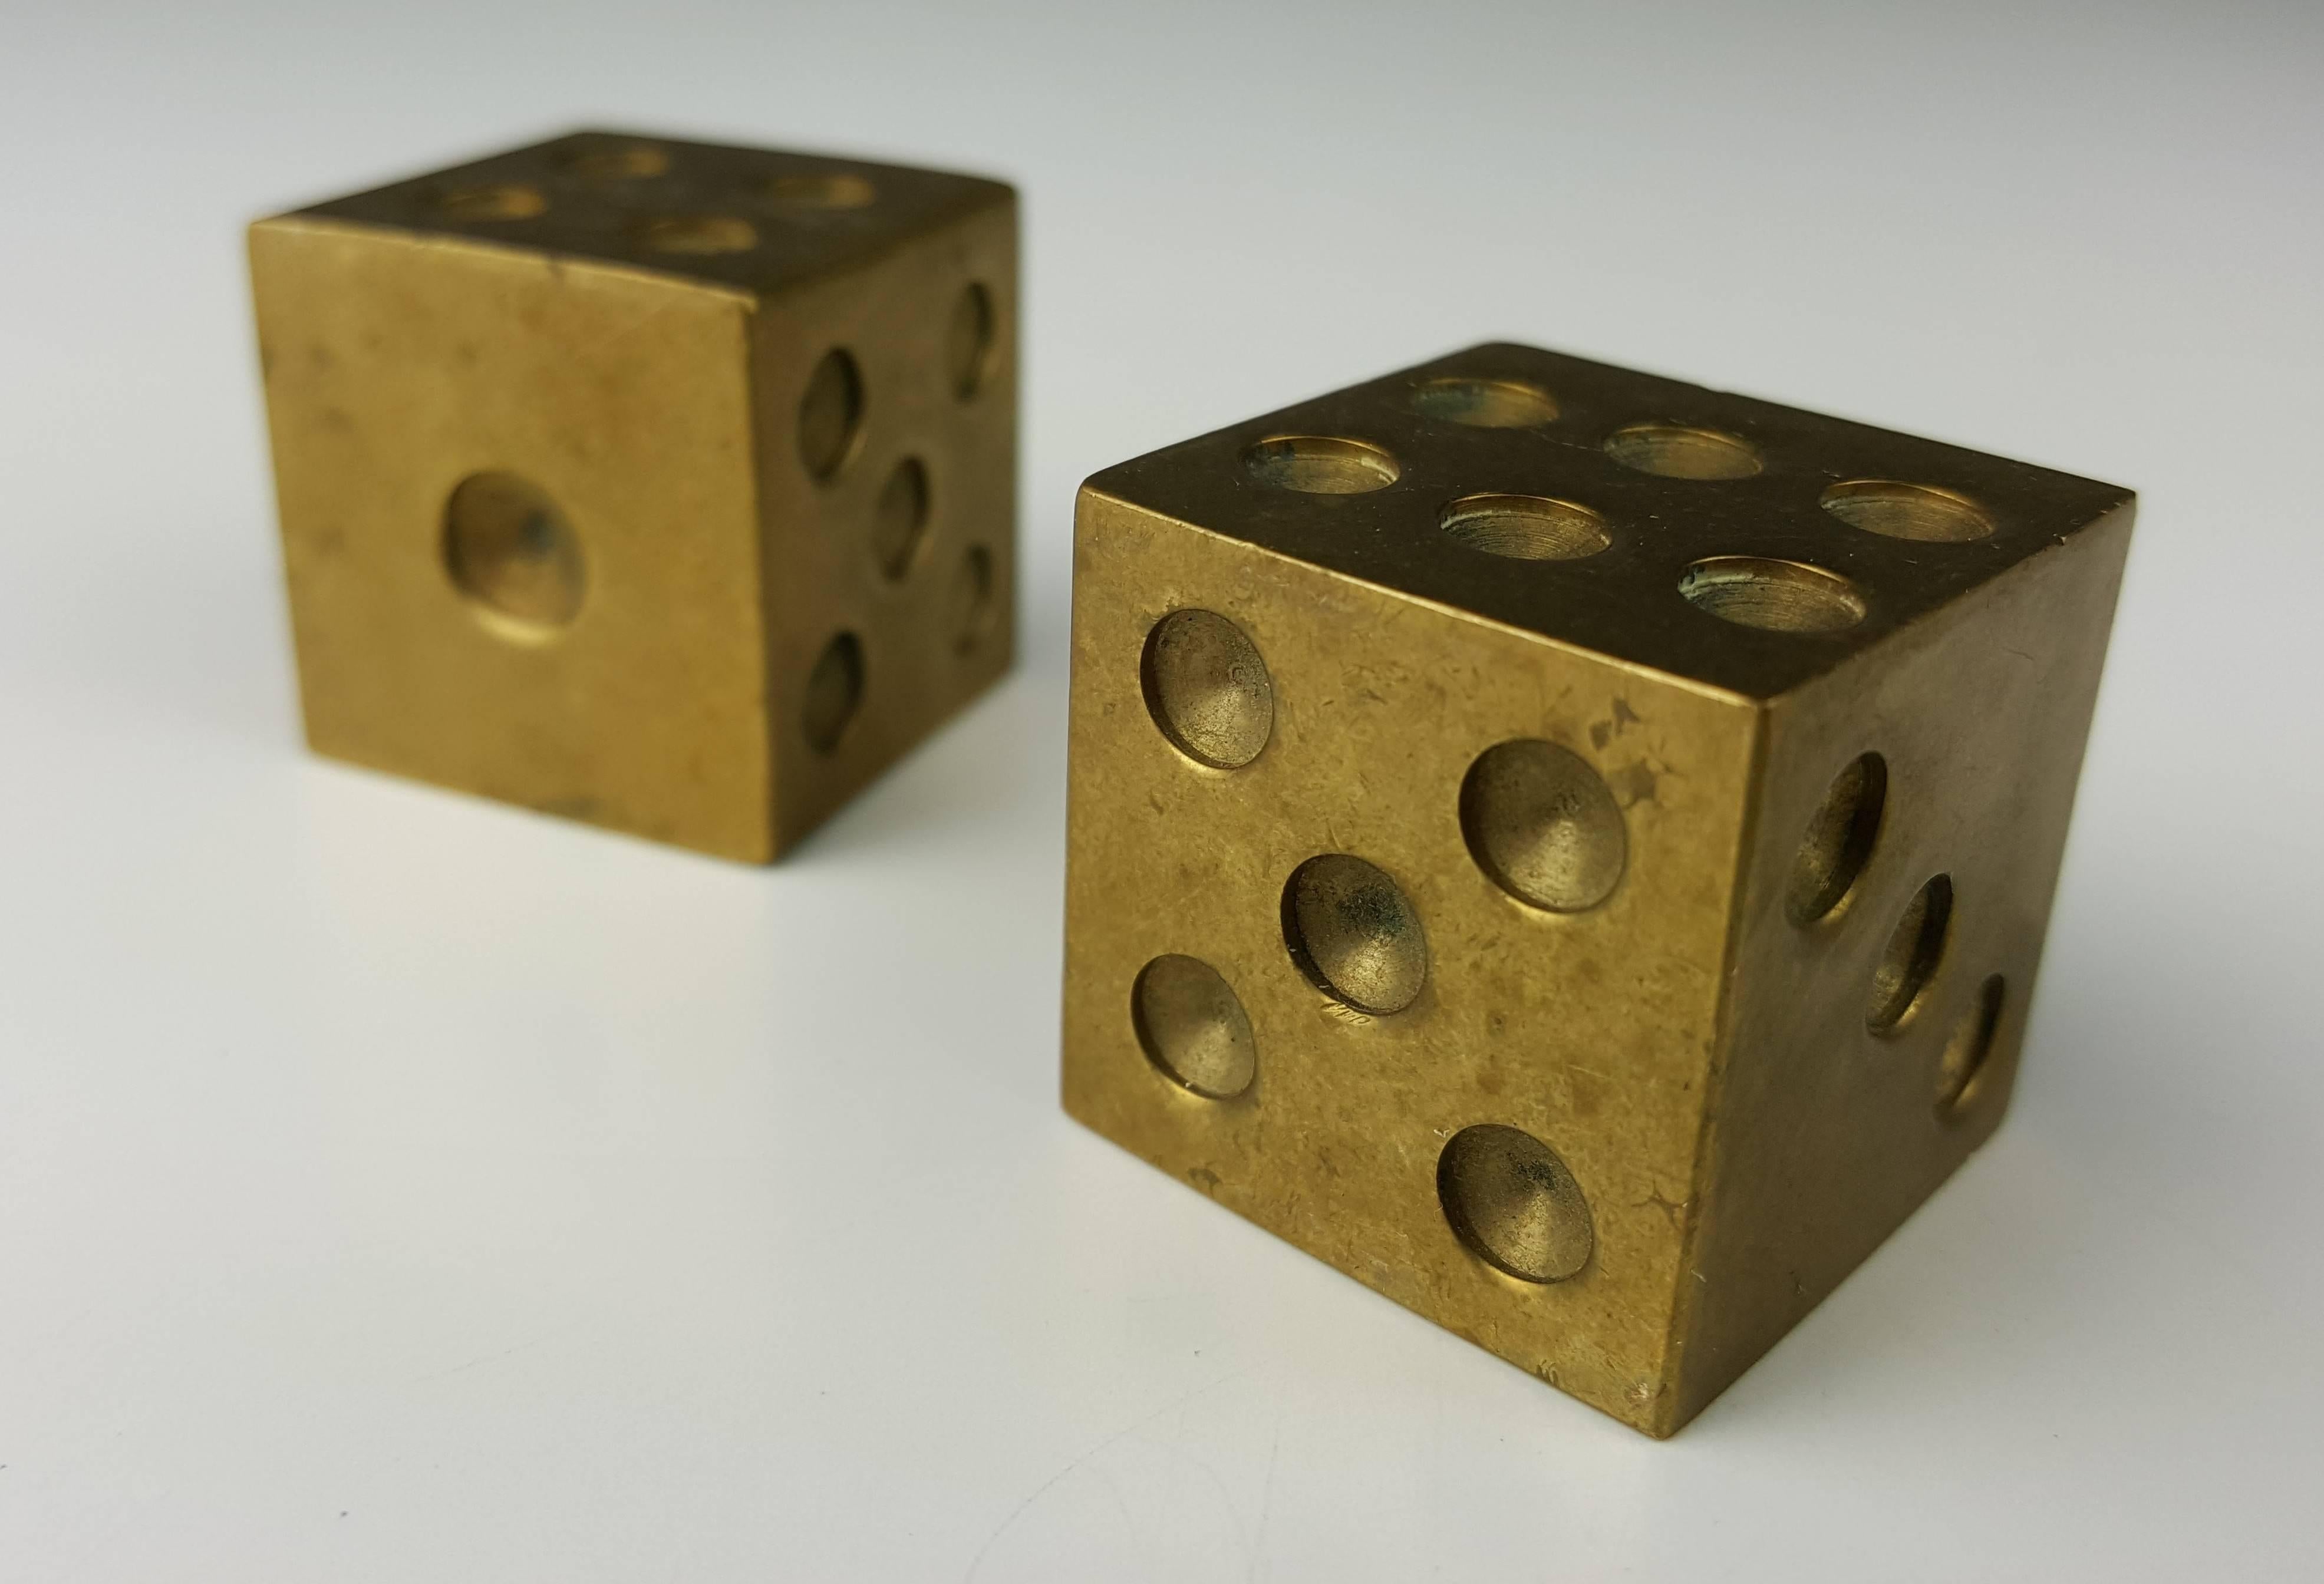 Solid brass oversized pop art dice, paperweights of objects.